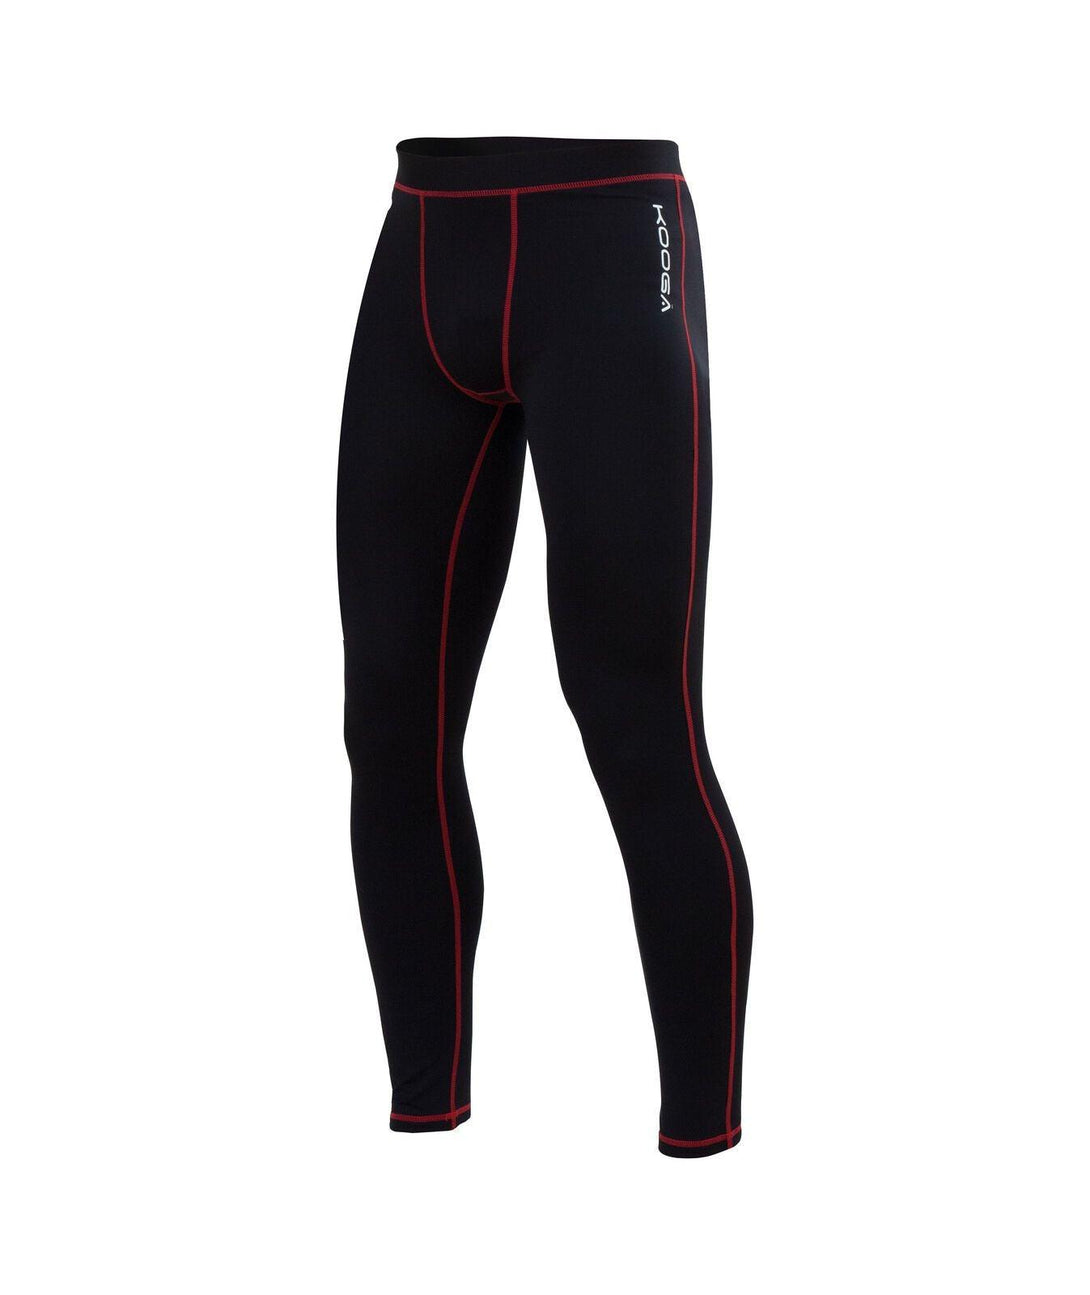 Rugby Heaven Kooga Power Pant Pro Adults Black/Red Baselayer Pants Ss15 - www.rugby-heaven.co.uk